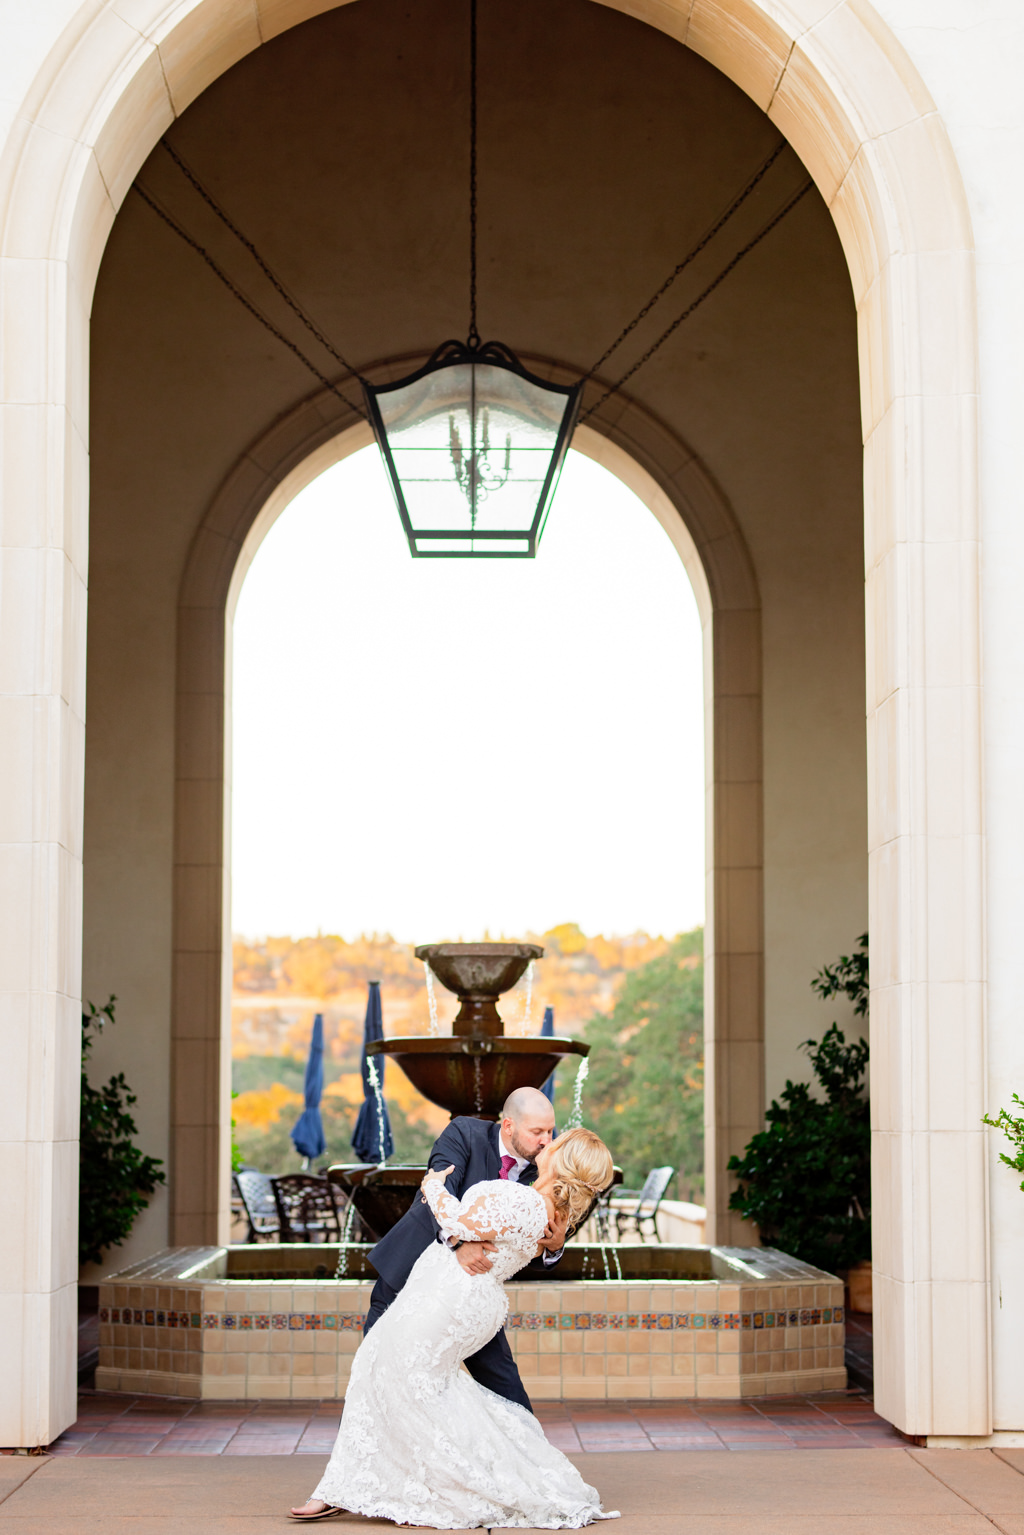 Groom dipping bride for a kiss in front of the fountain at their catta verdera wedding